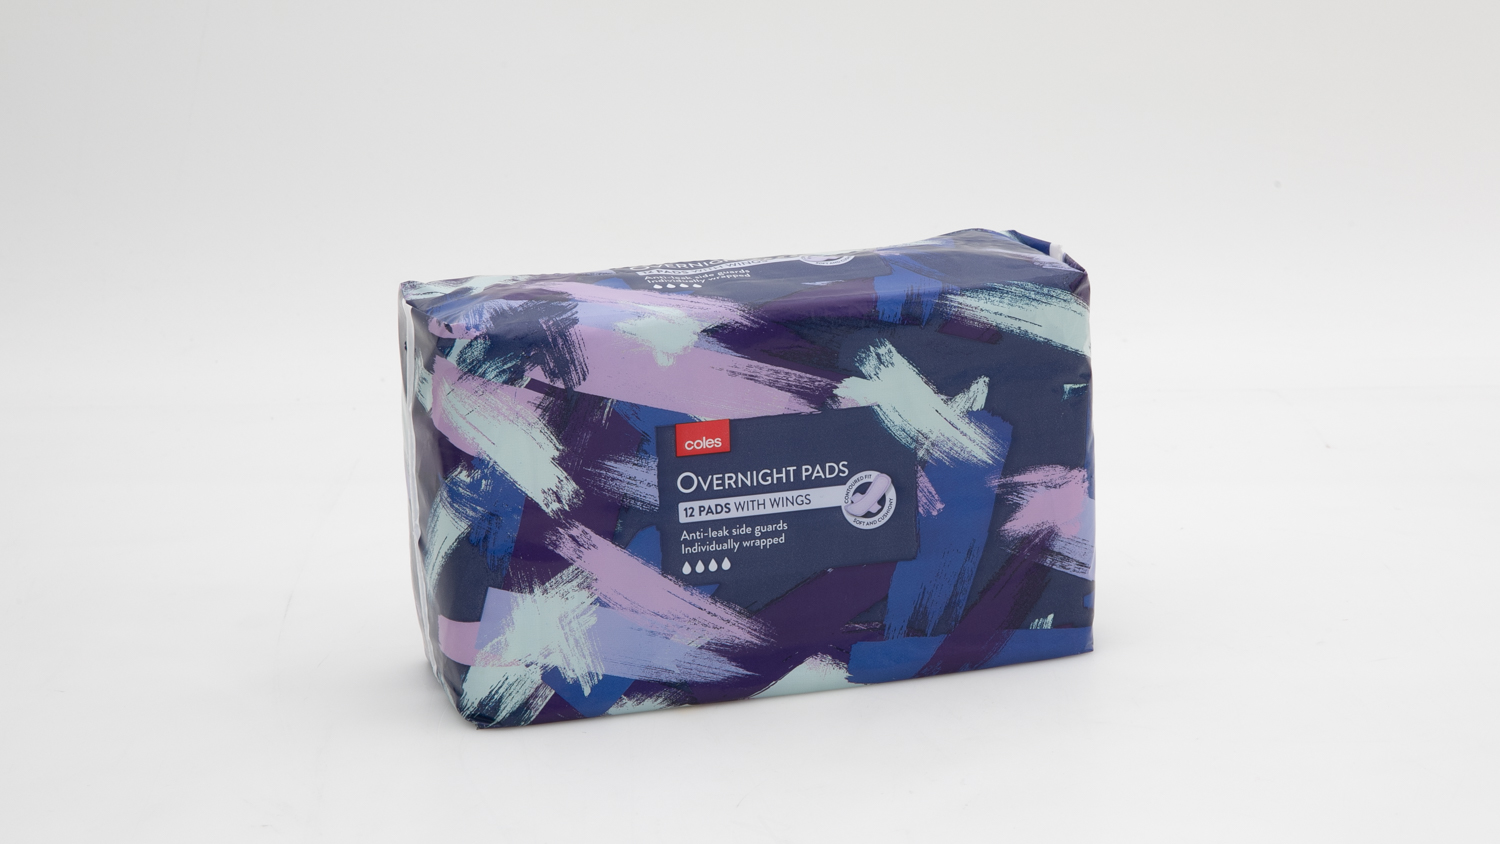 Coles Overnight Pads with wings Review, Sanitary pad